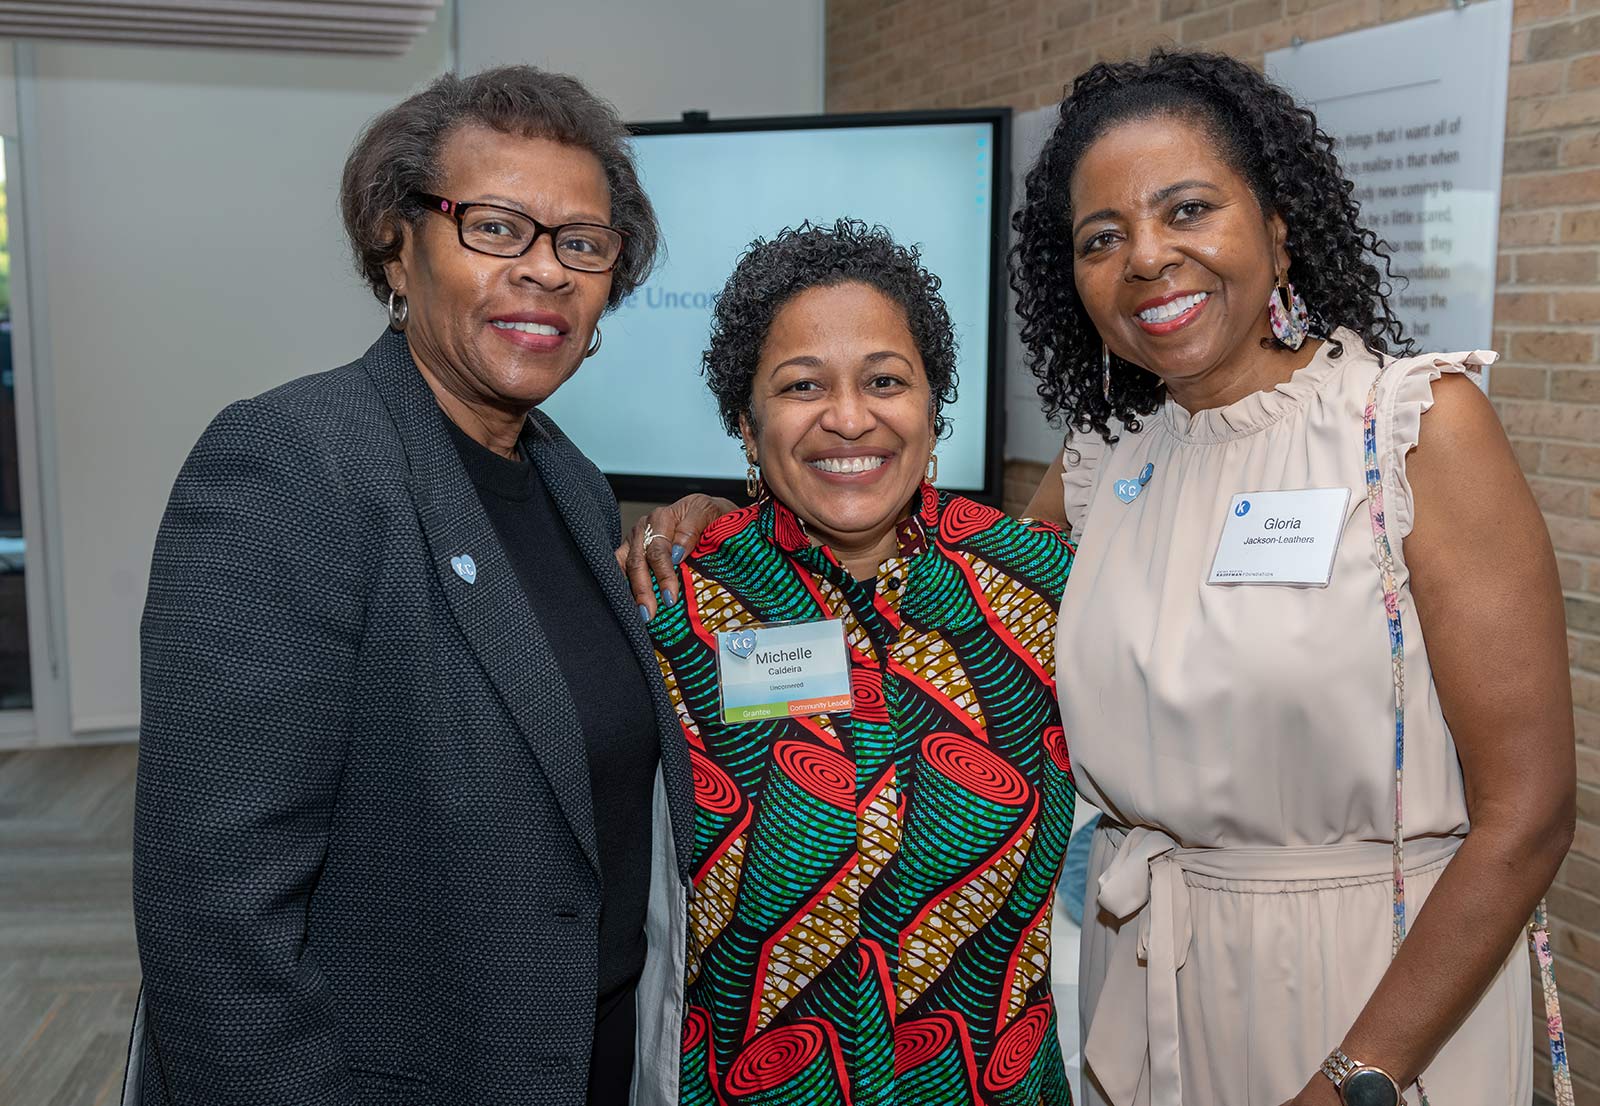 Karen Daniels, Michelle Caldeira, and Gloria Jackson-Leathers at the Kauffman Foundation Open House event Sept. 28, 2023.